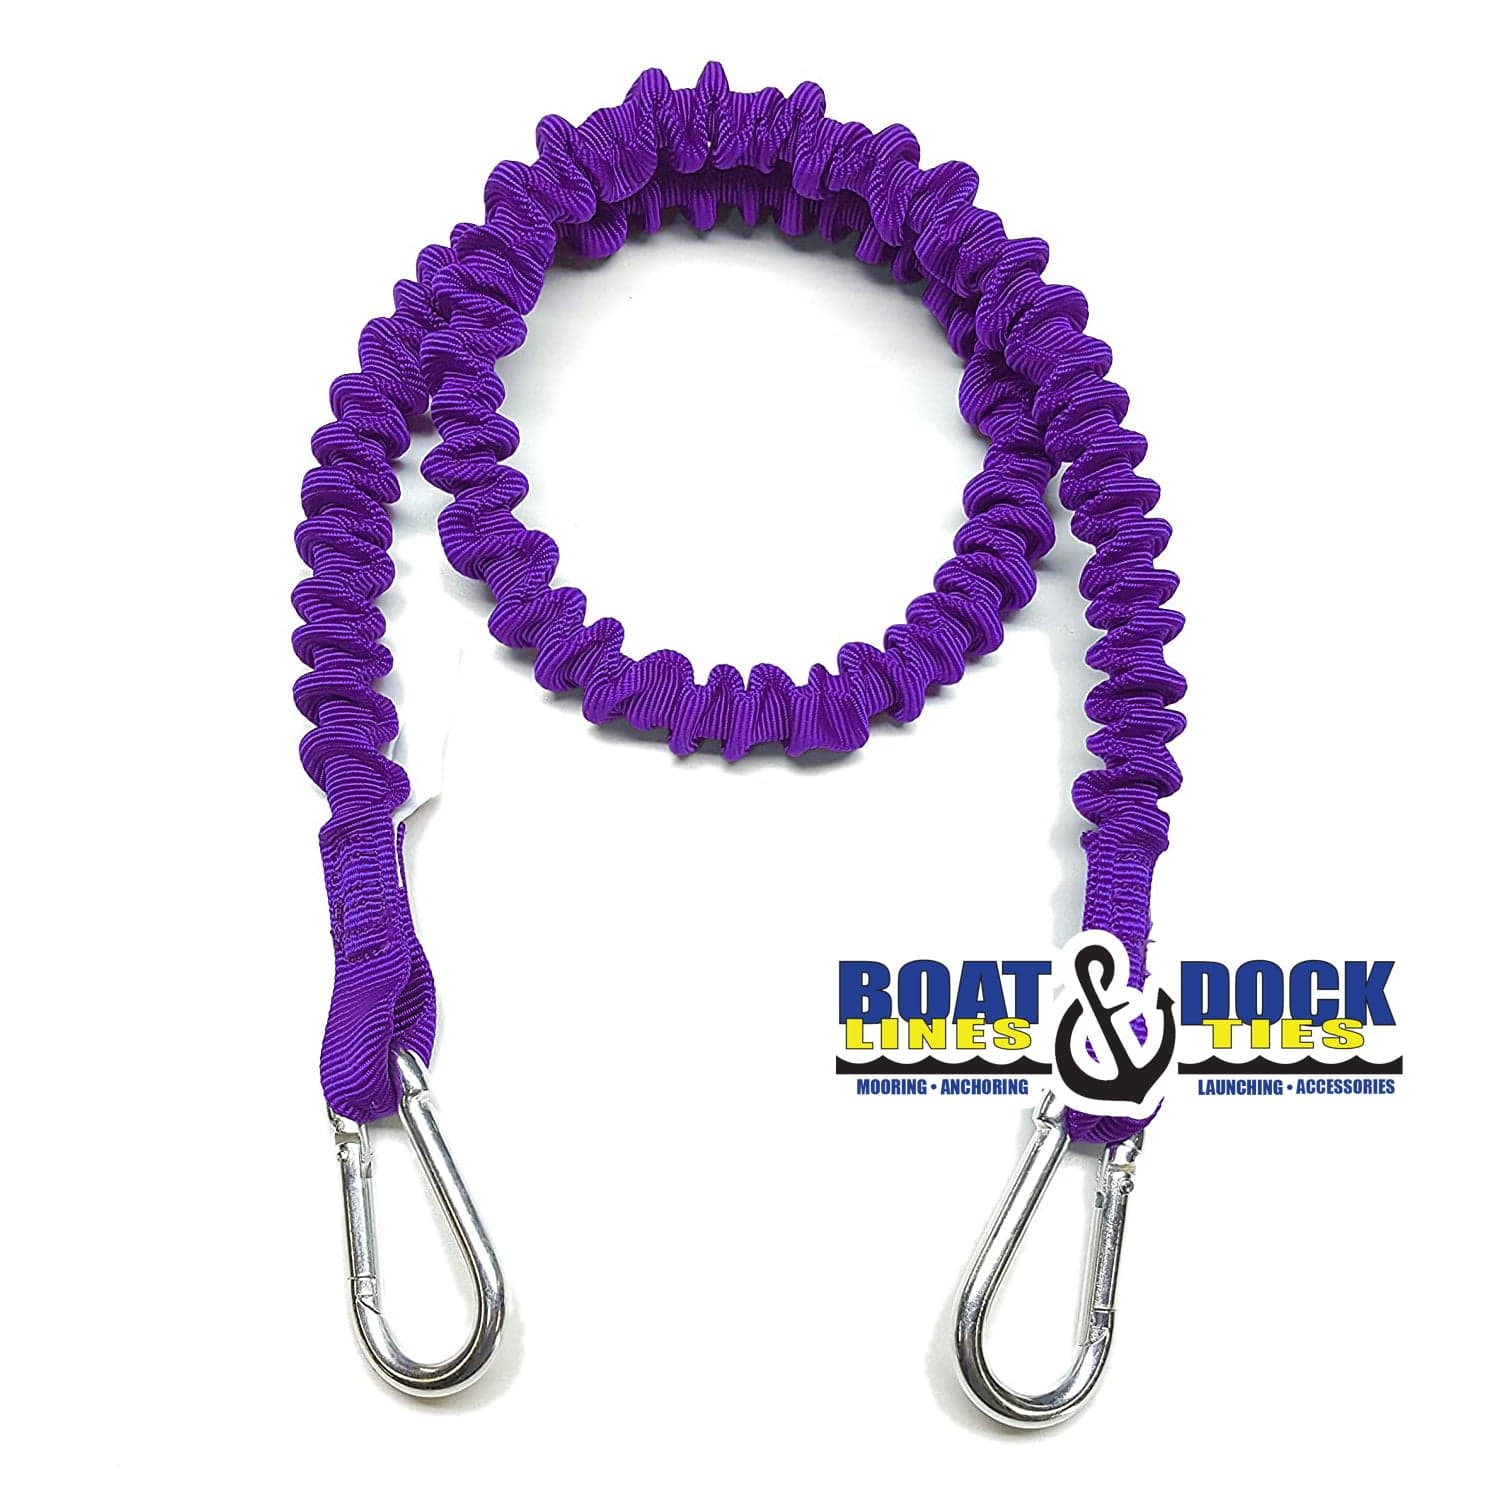 Boat Dock Tie Bungee Cords, 2 Hooked Ends, UV Protected Bungee Cords - Set of 2 - Made in USA - Boat Lines & Dock Ties Boat Lines & Dock Ties 48" / Purple